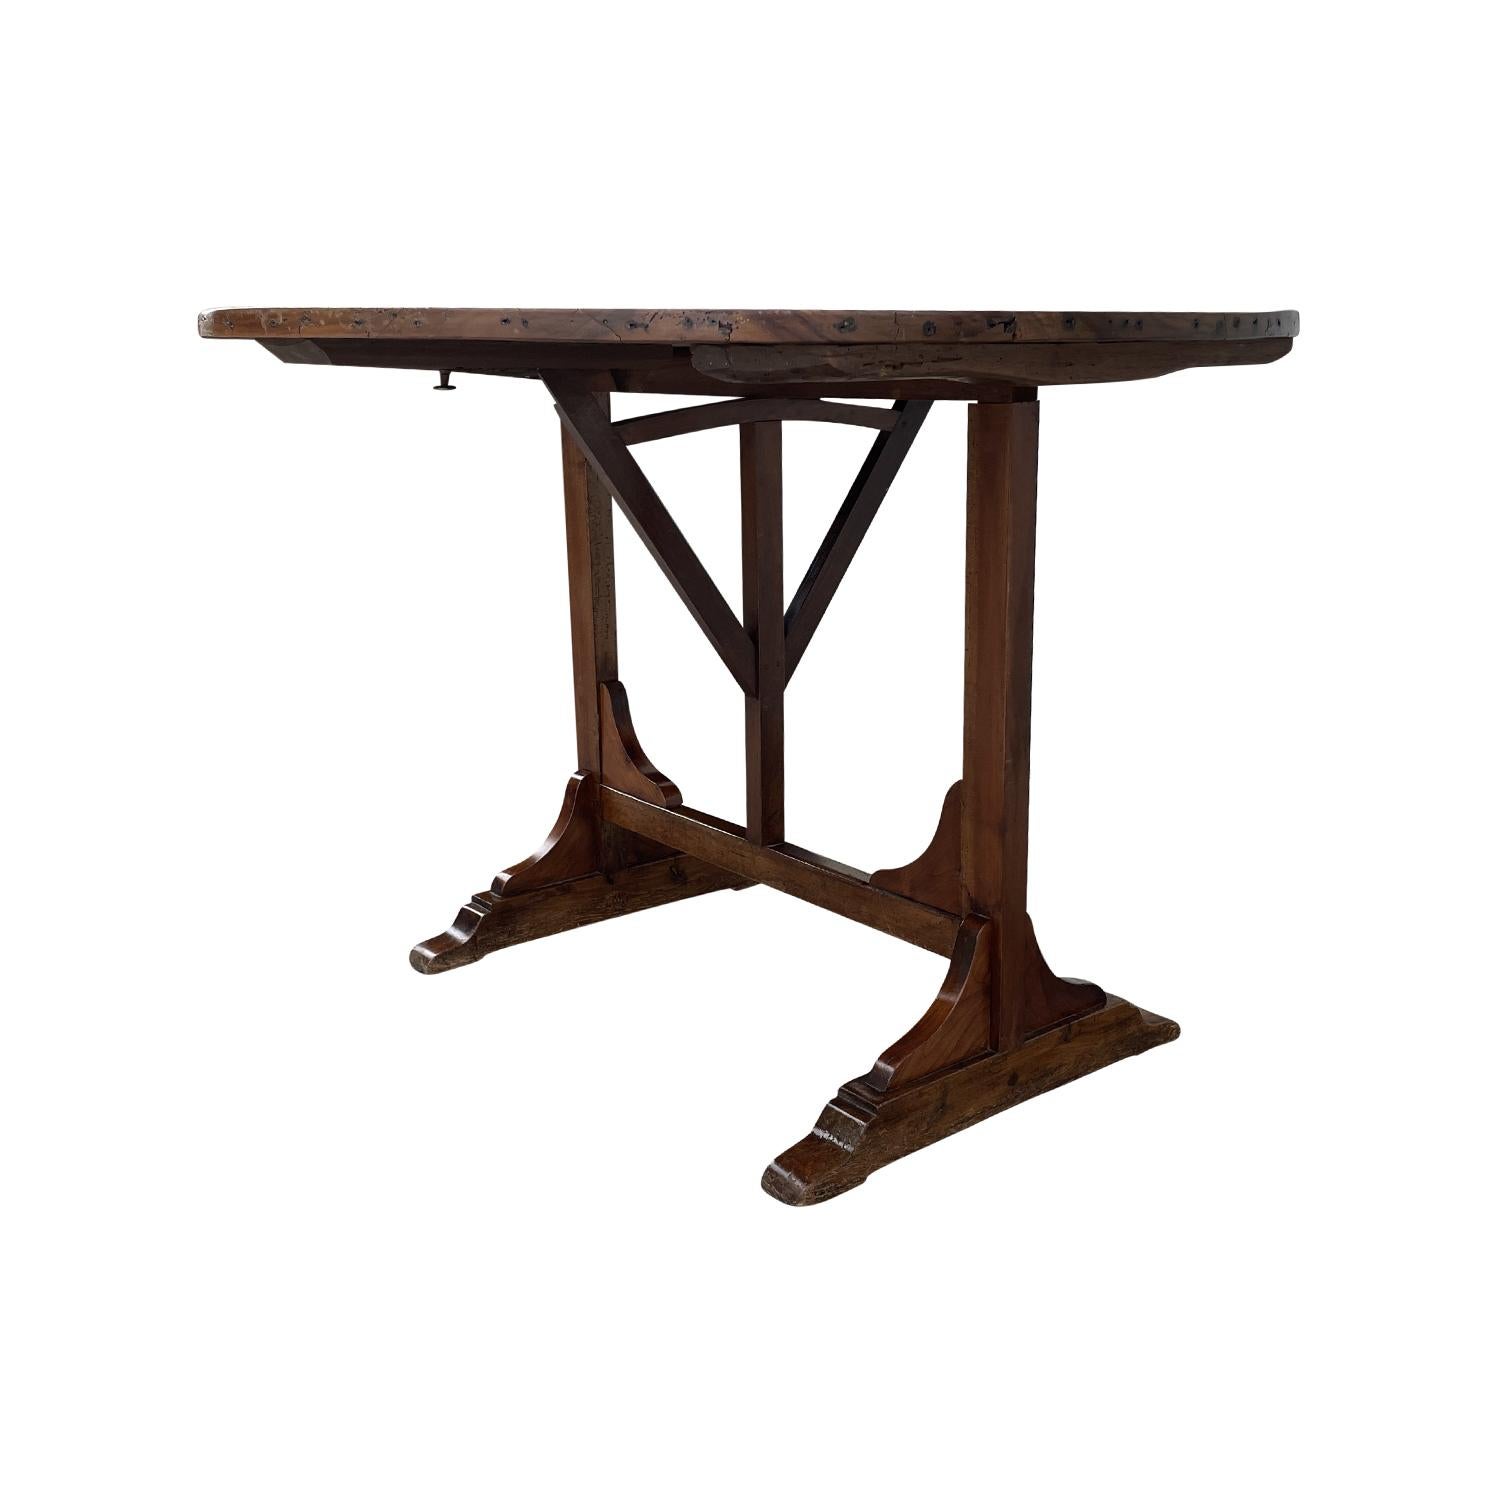 19th Century French Provencal Walnut Folding Wine Table - Antique Center Table In Good Condition For Sale In West Palm Beach, FL